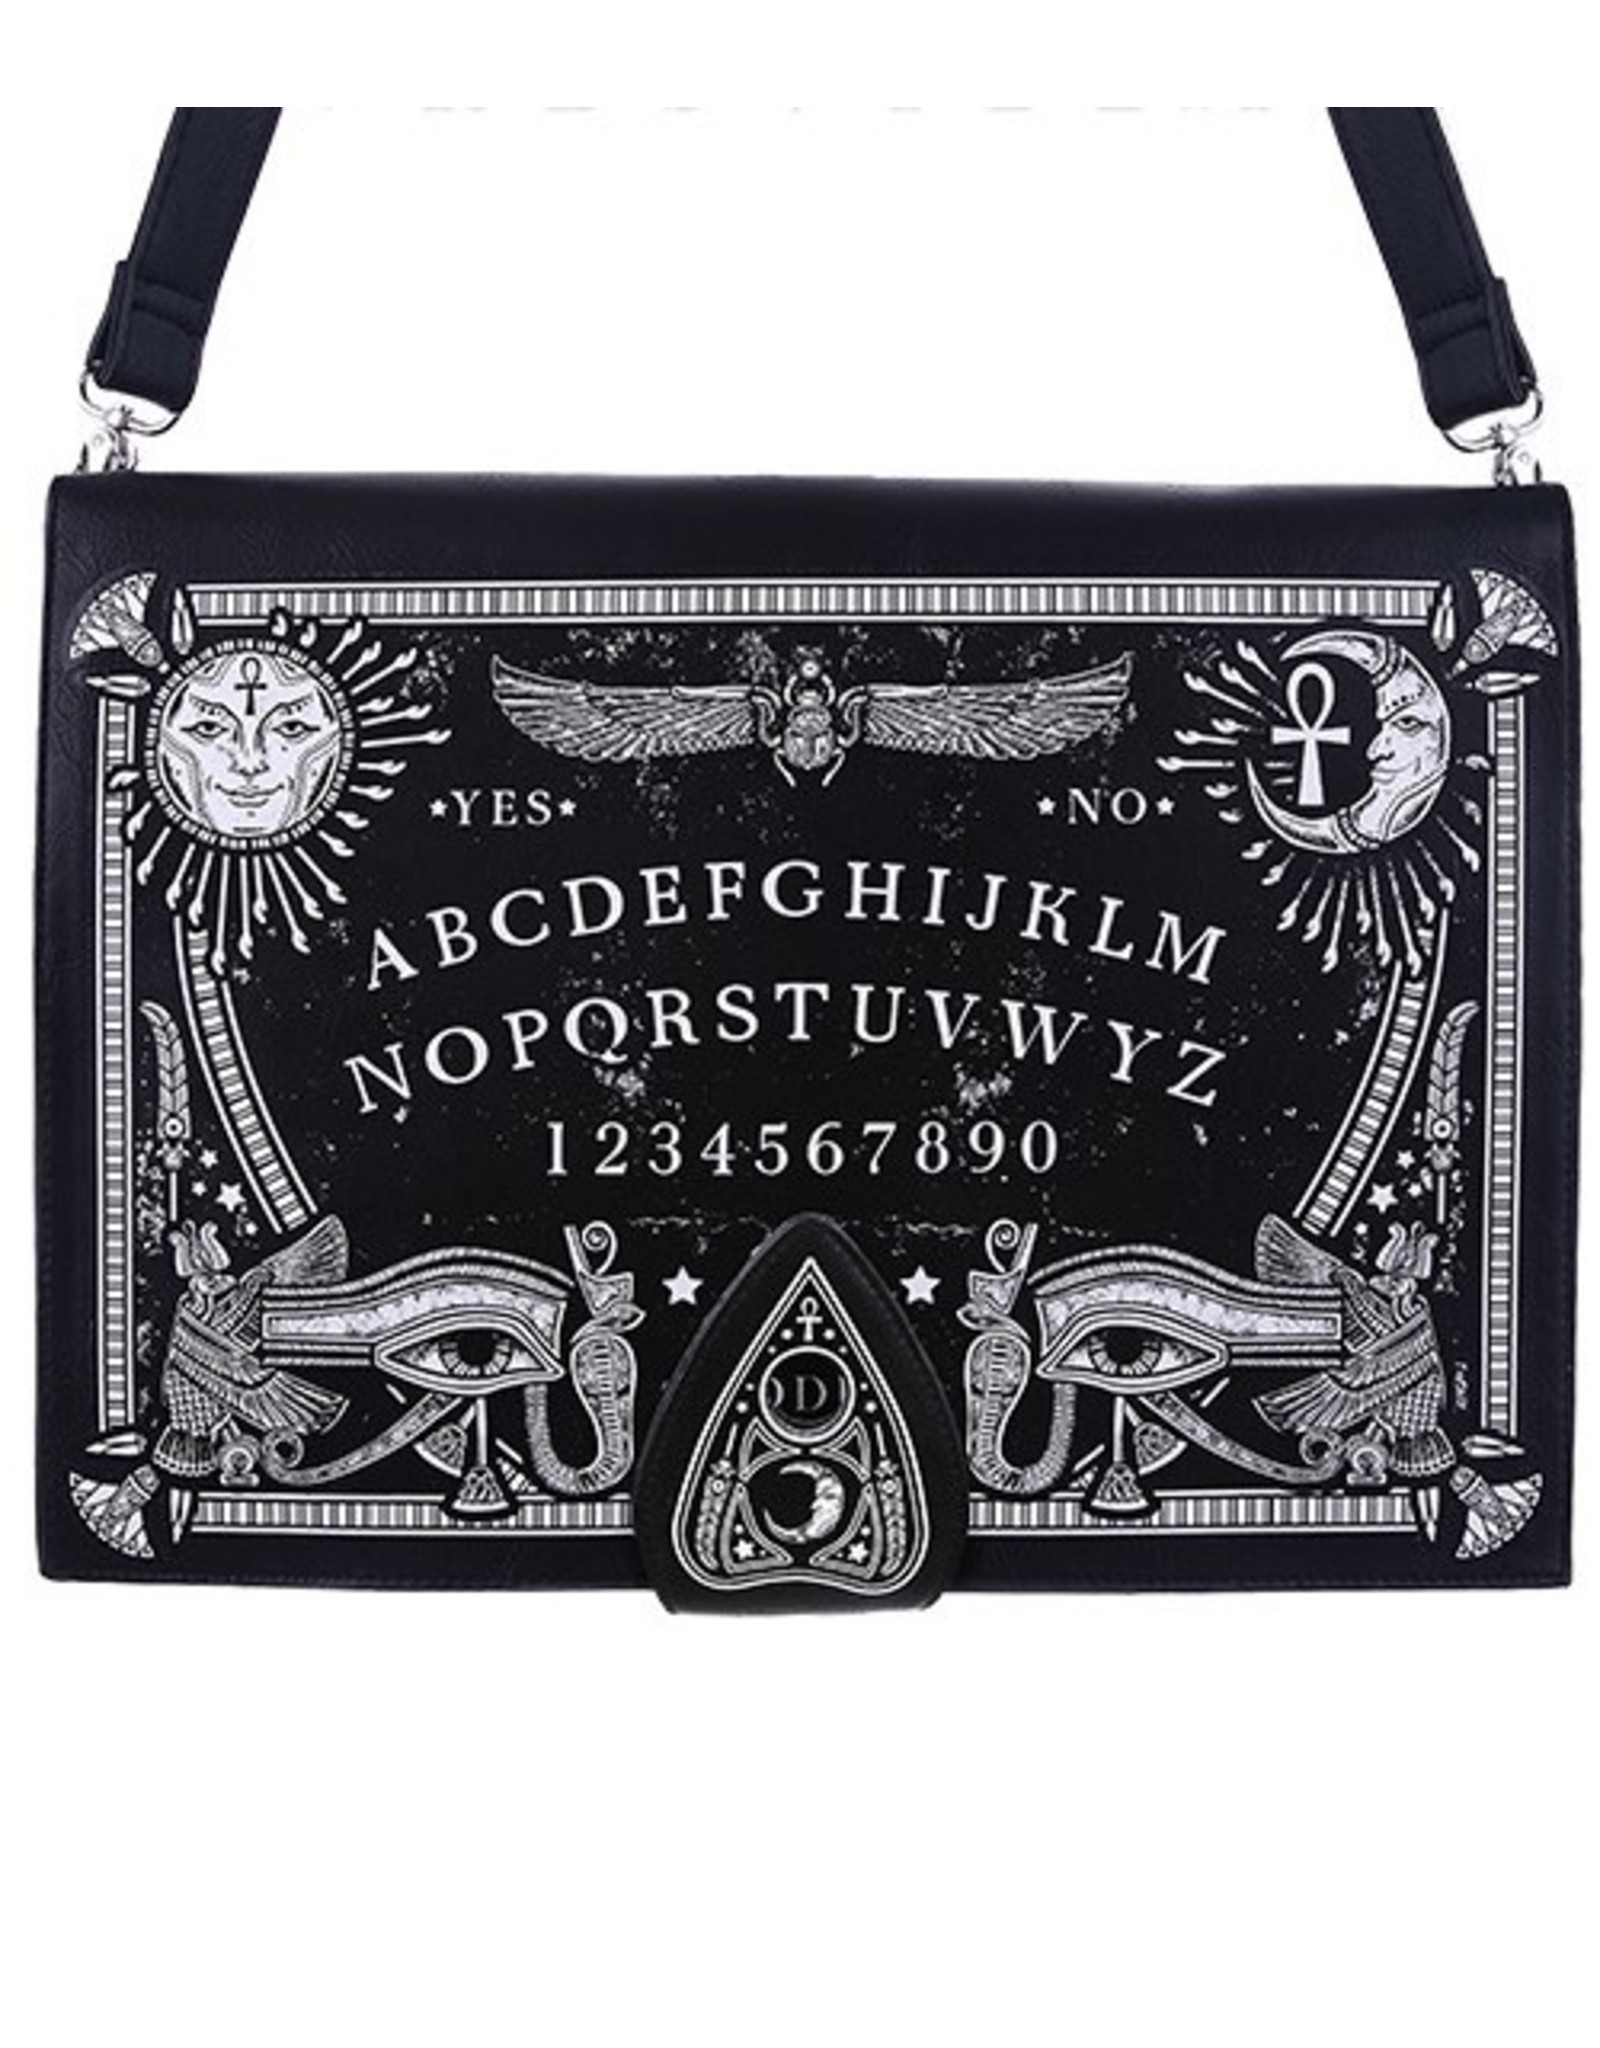 Restyle Gothic bags Steampunk bags - Ouija Board Gothic handbag Restyle